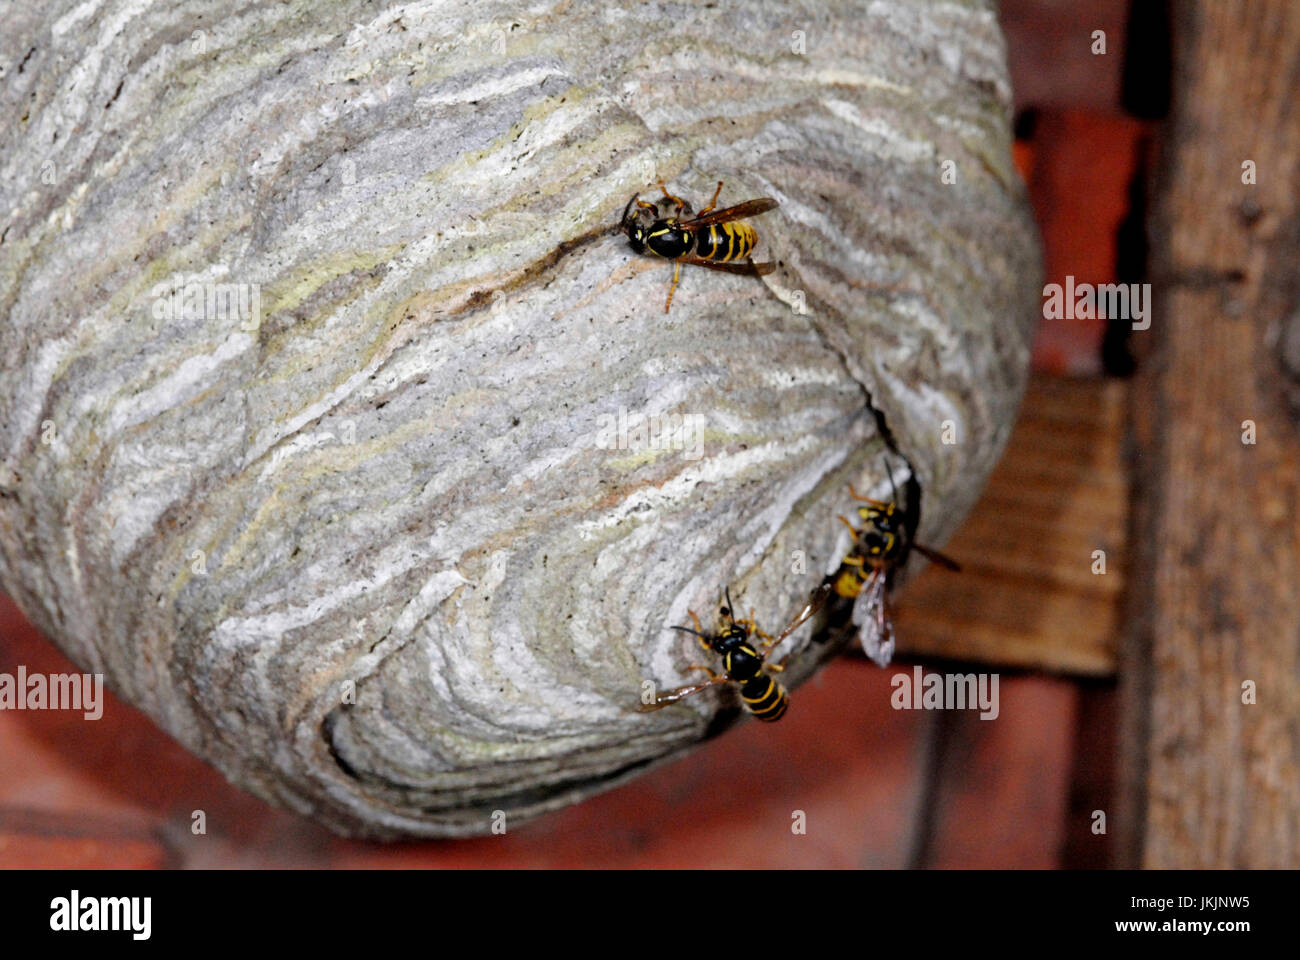 This is the nest of the Common Wasp (Vespula vulgaris).The nest is made of a paper like material constructed from wood scrappings - the largest nests have been found up to 1mtr across. Stock Photo